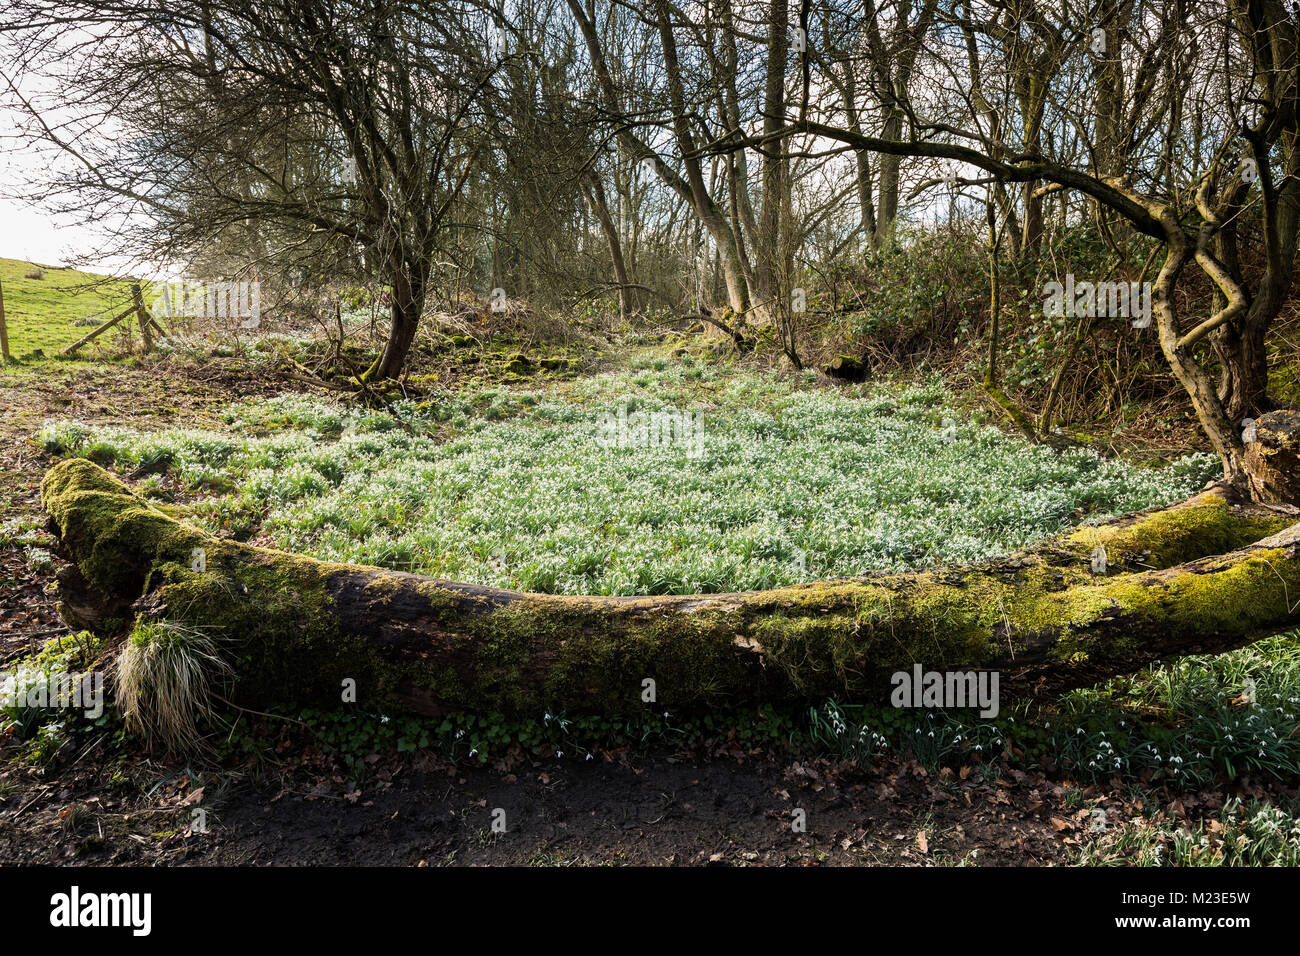 An image of a triangle of Snowdrops showing the first signs of spring in a Derbyshire Woodland, England, UK Stock Photo